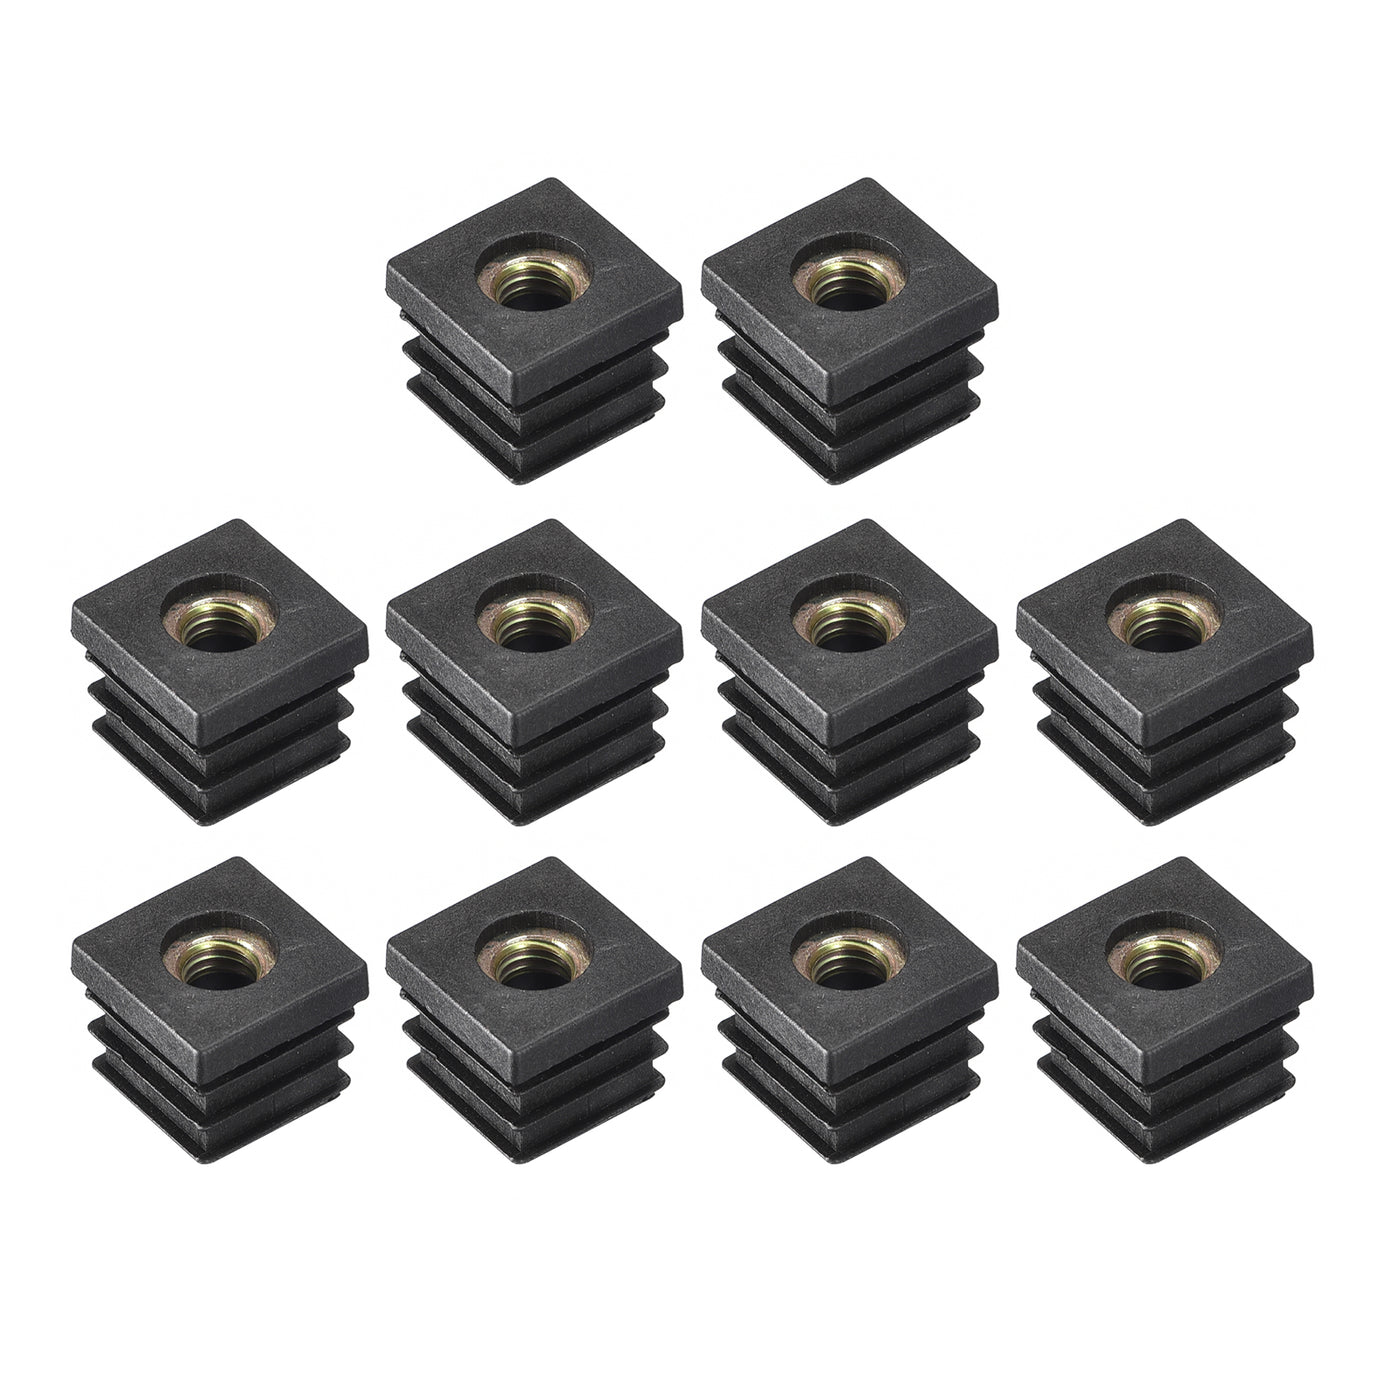 uxcell Uxcell 10Pcs 0.79"x0.79" Caster Insert with Thread, Square M8 Thread for Furniture